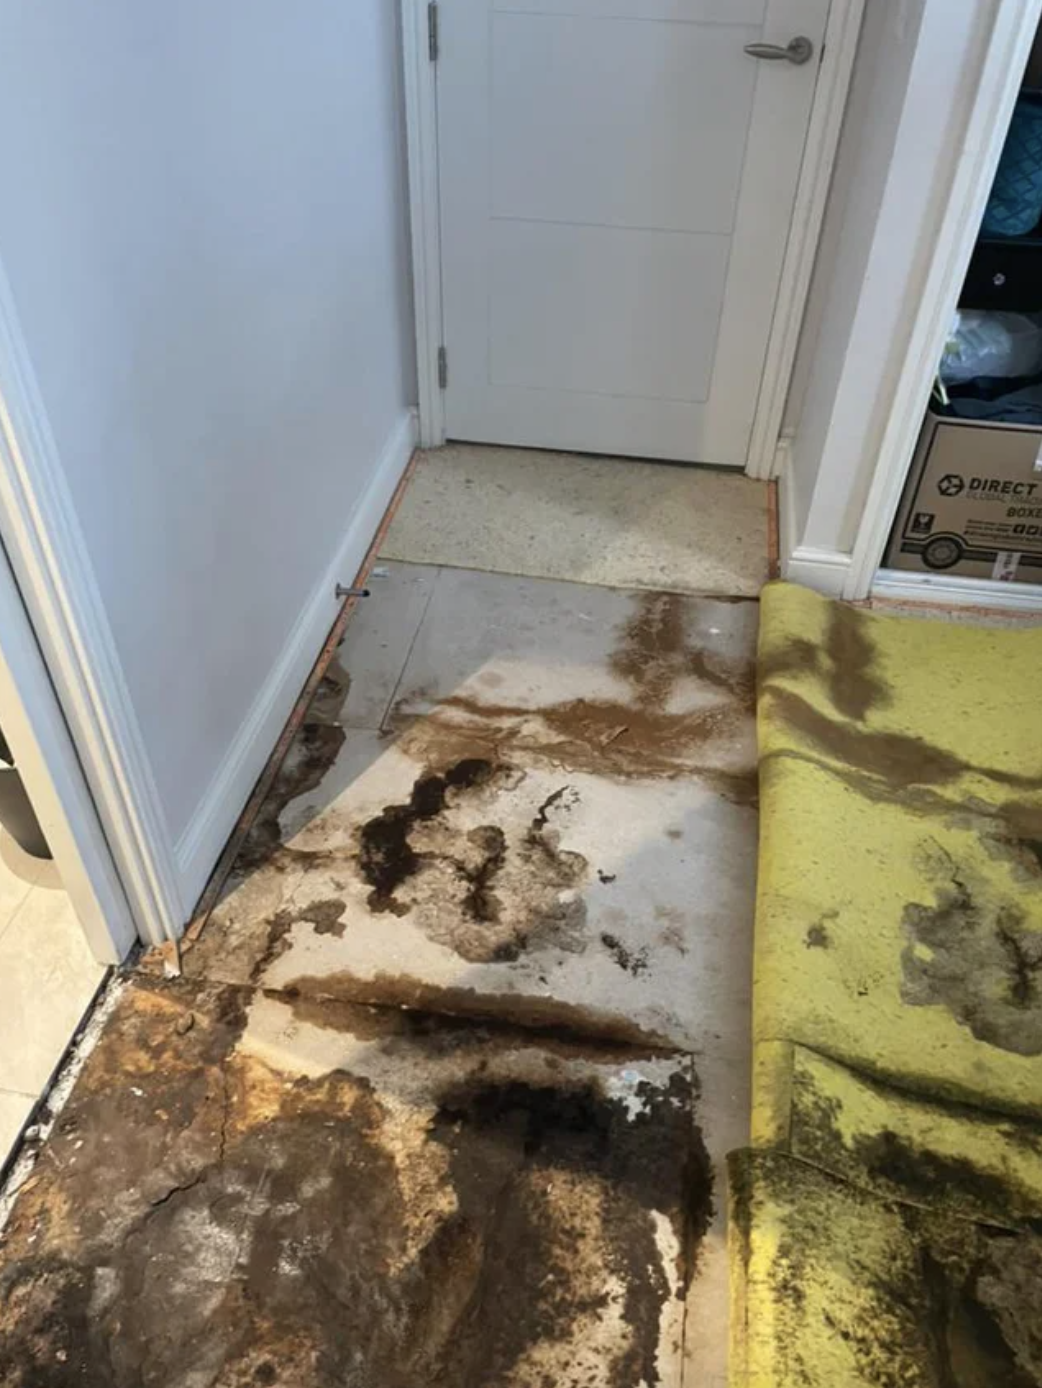 The floors covered in mold